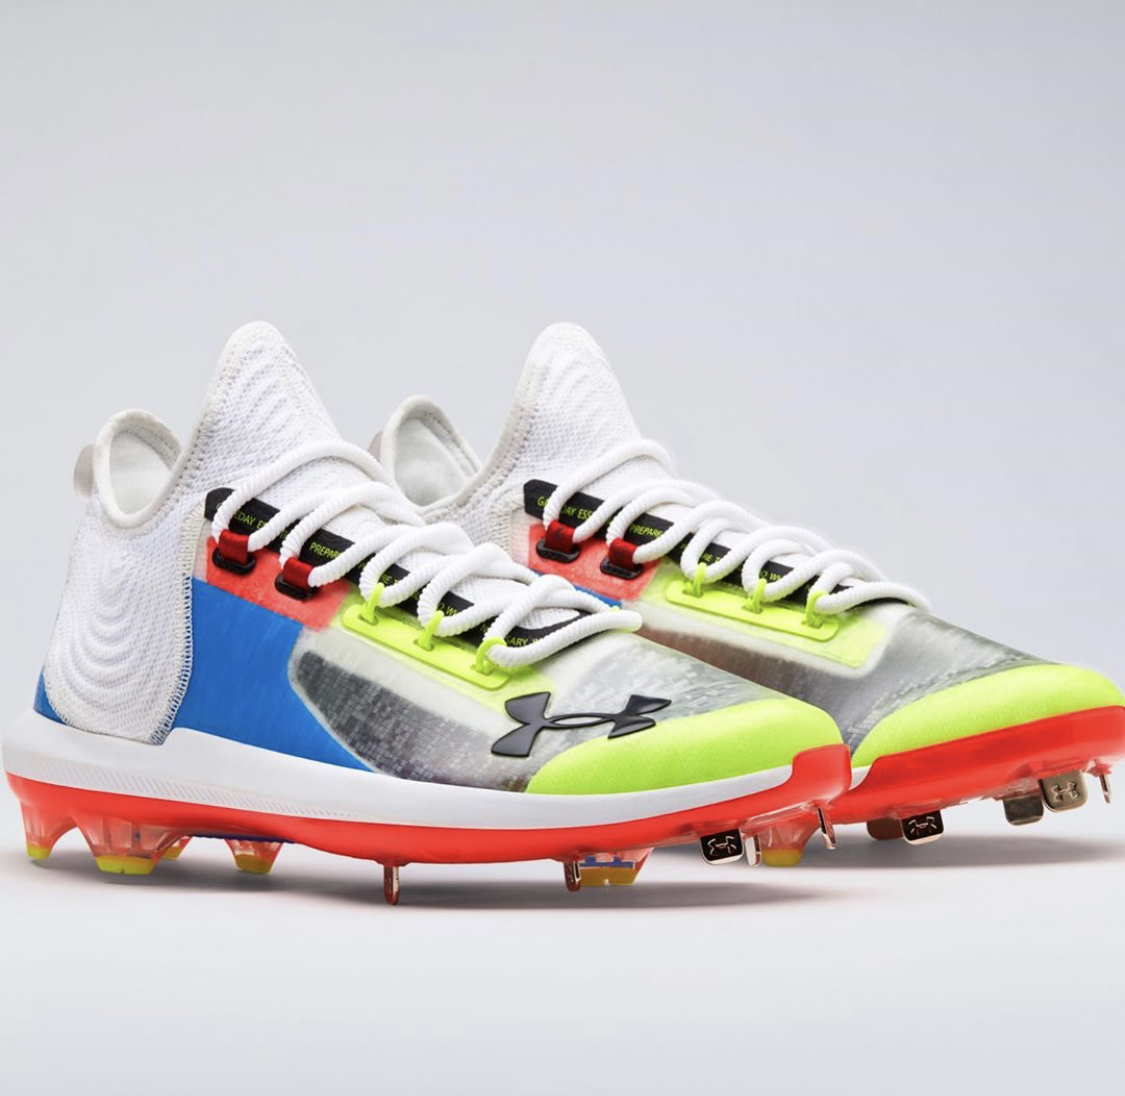 customize your own baseball cleats